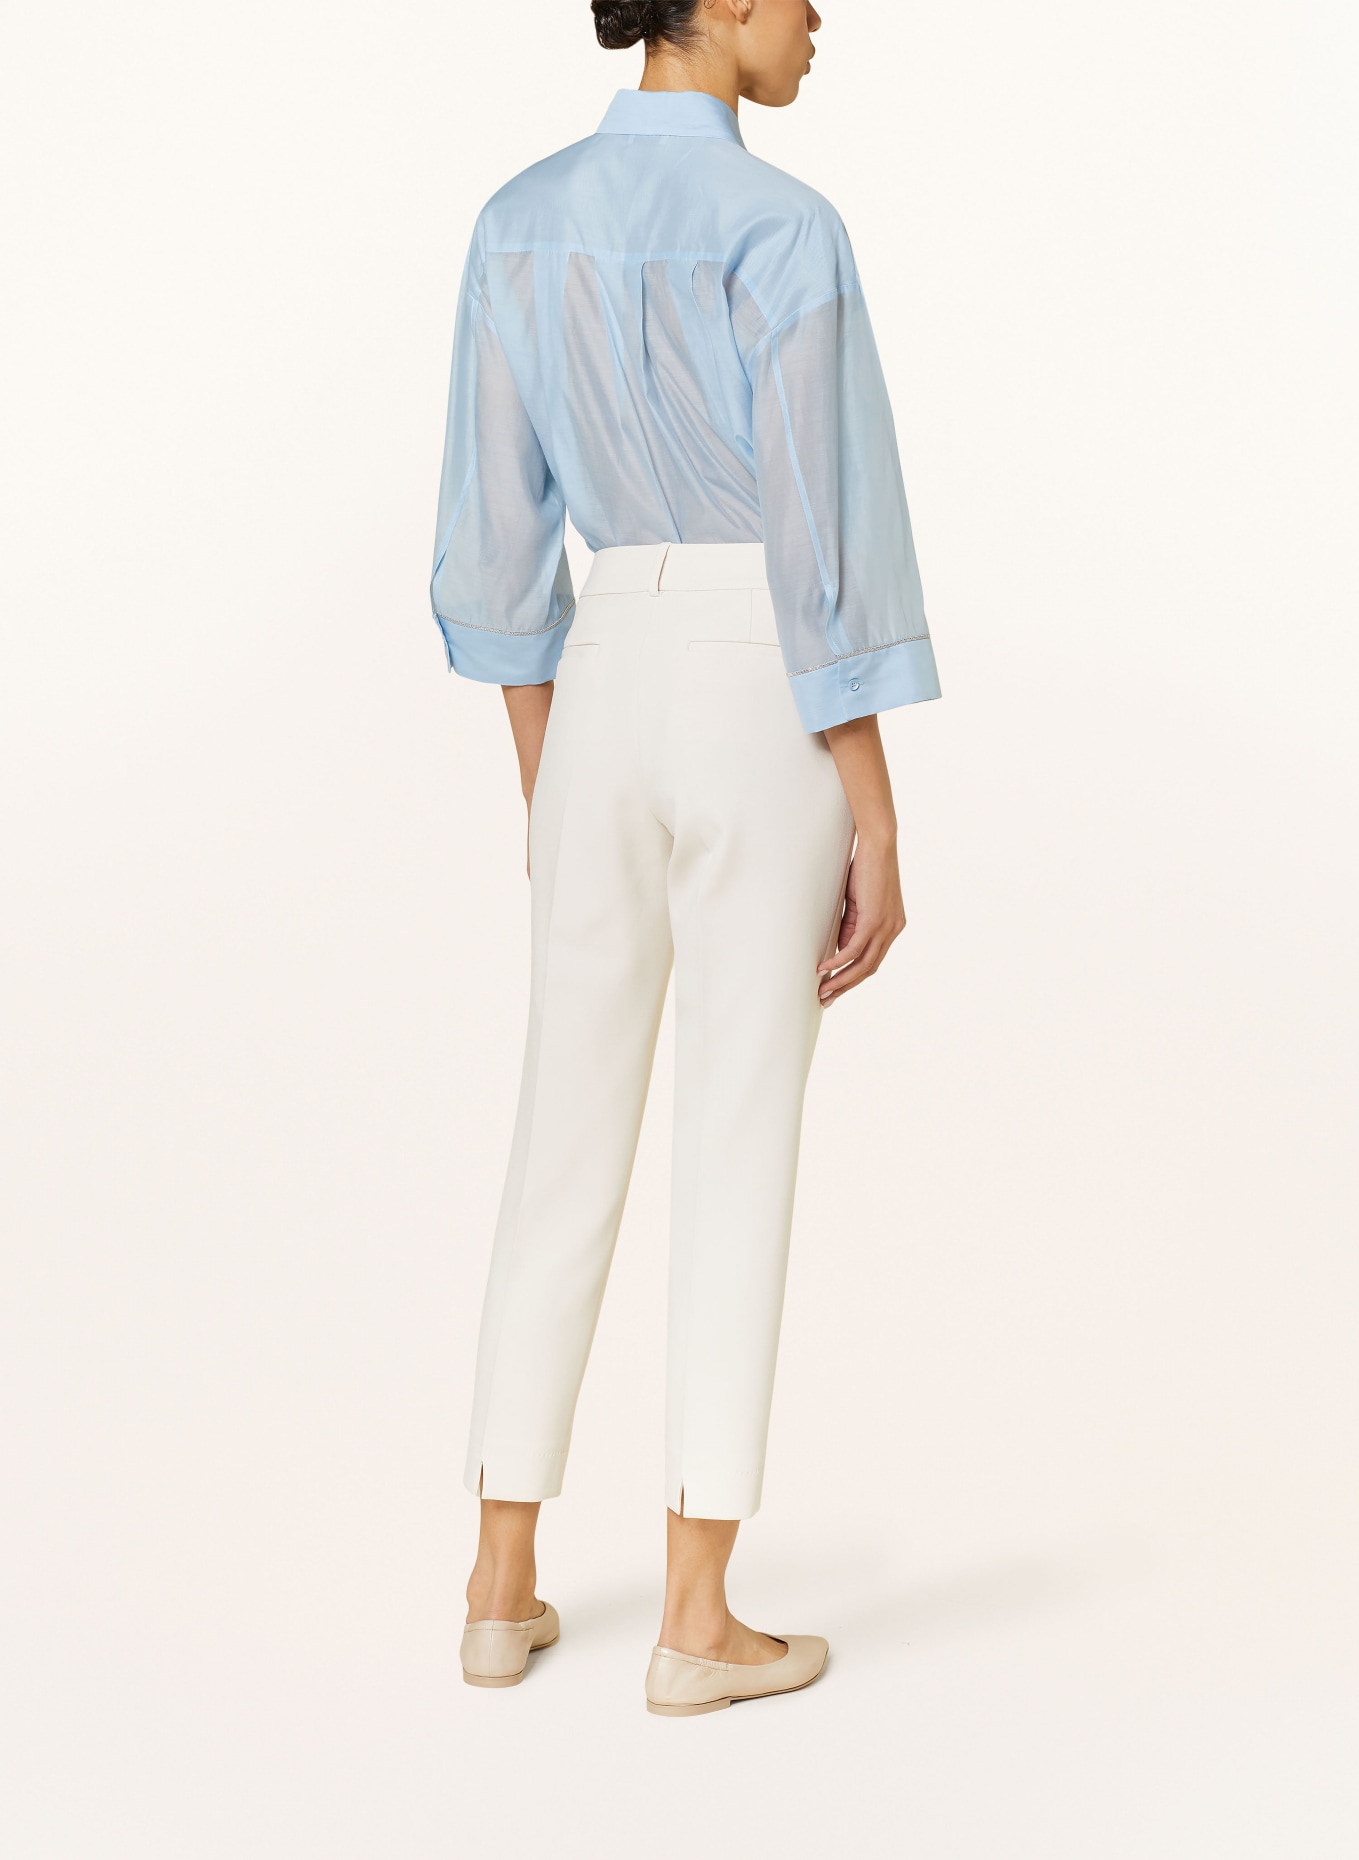 PESERICO Shirt blouse with silk and 3/4 sleeves, Color: LIGHT BLUE (Image 3)